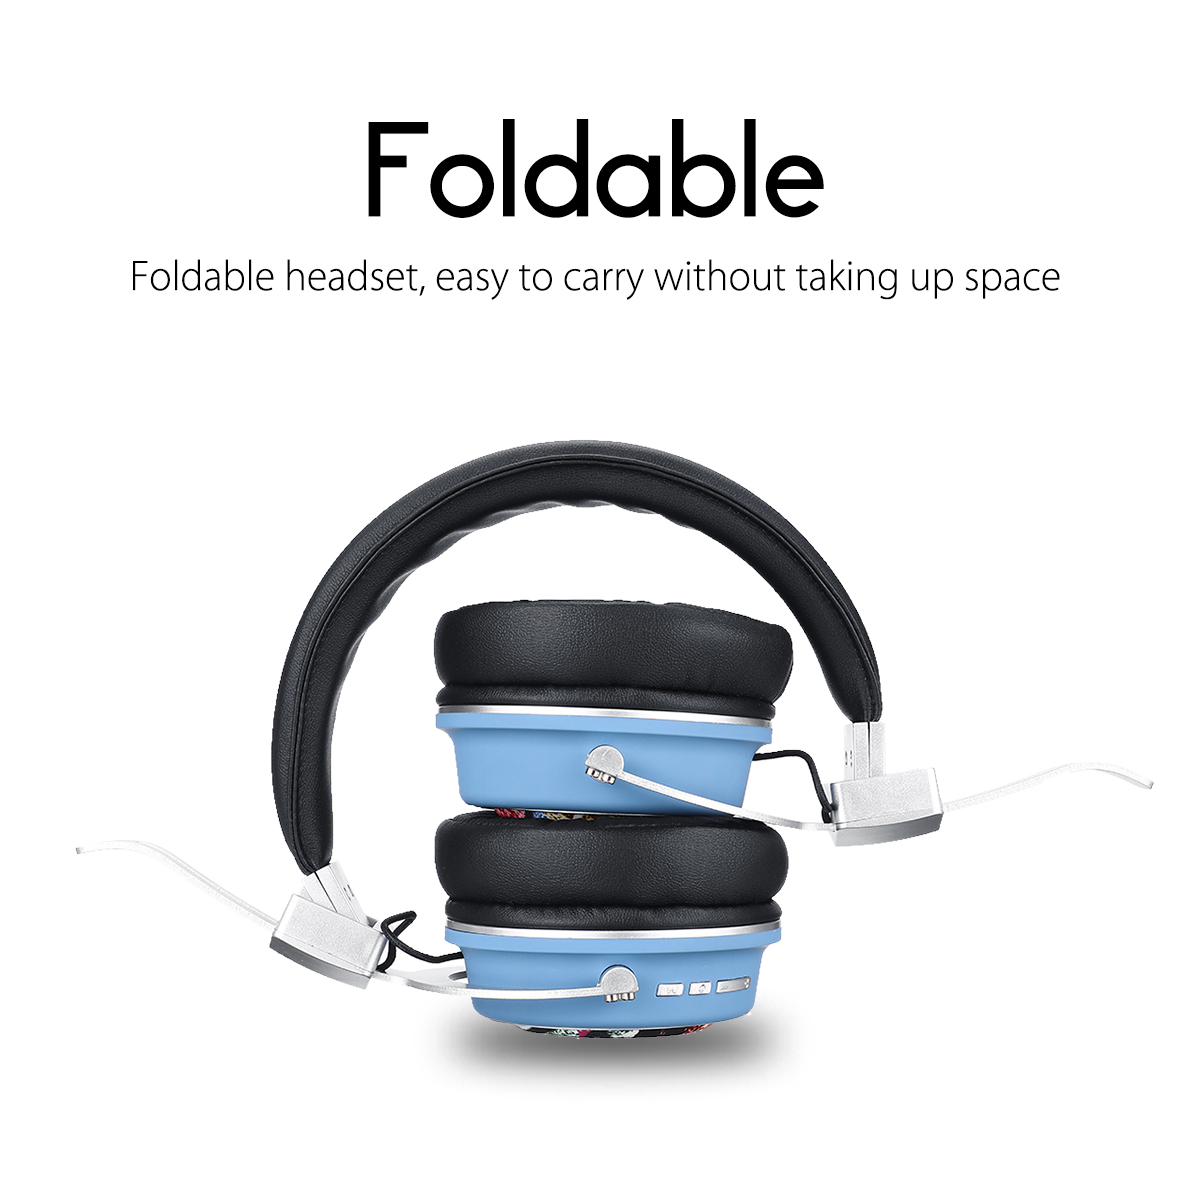 MH5 Wireless bluetooth 5.0 Headphone Foldable Pattern 3D Stereo TF Card AUX Headphone with Mic